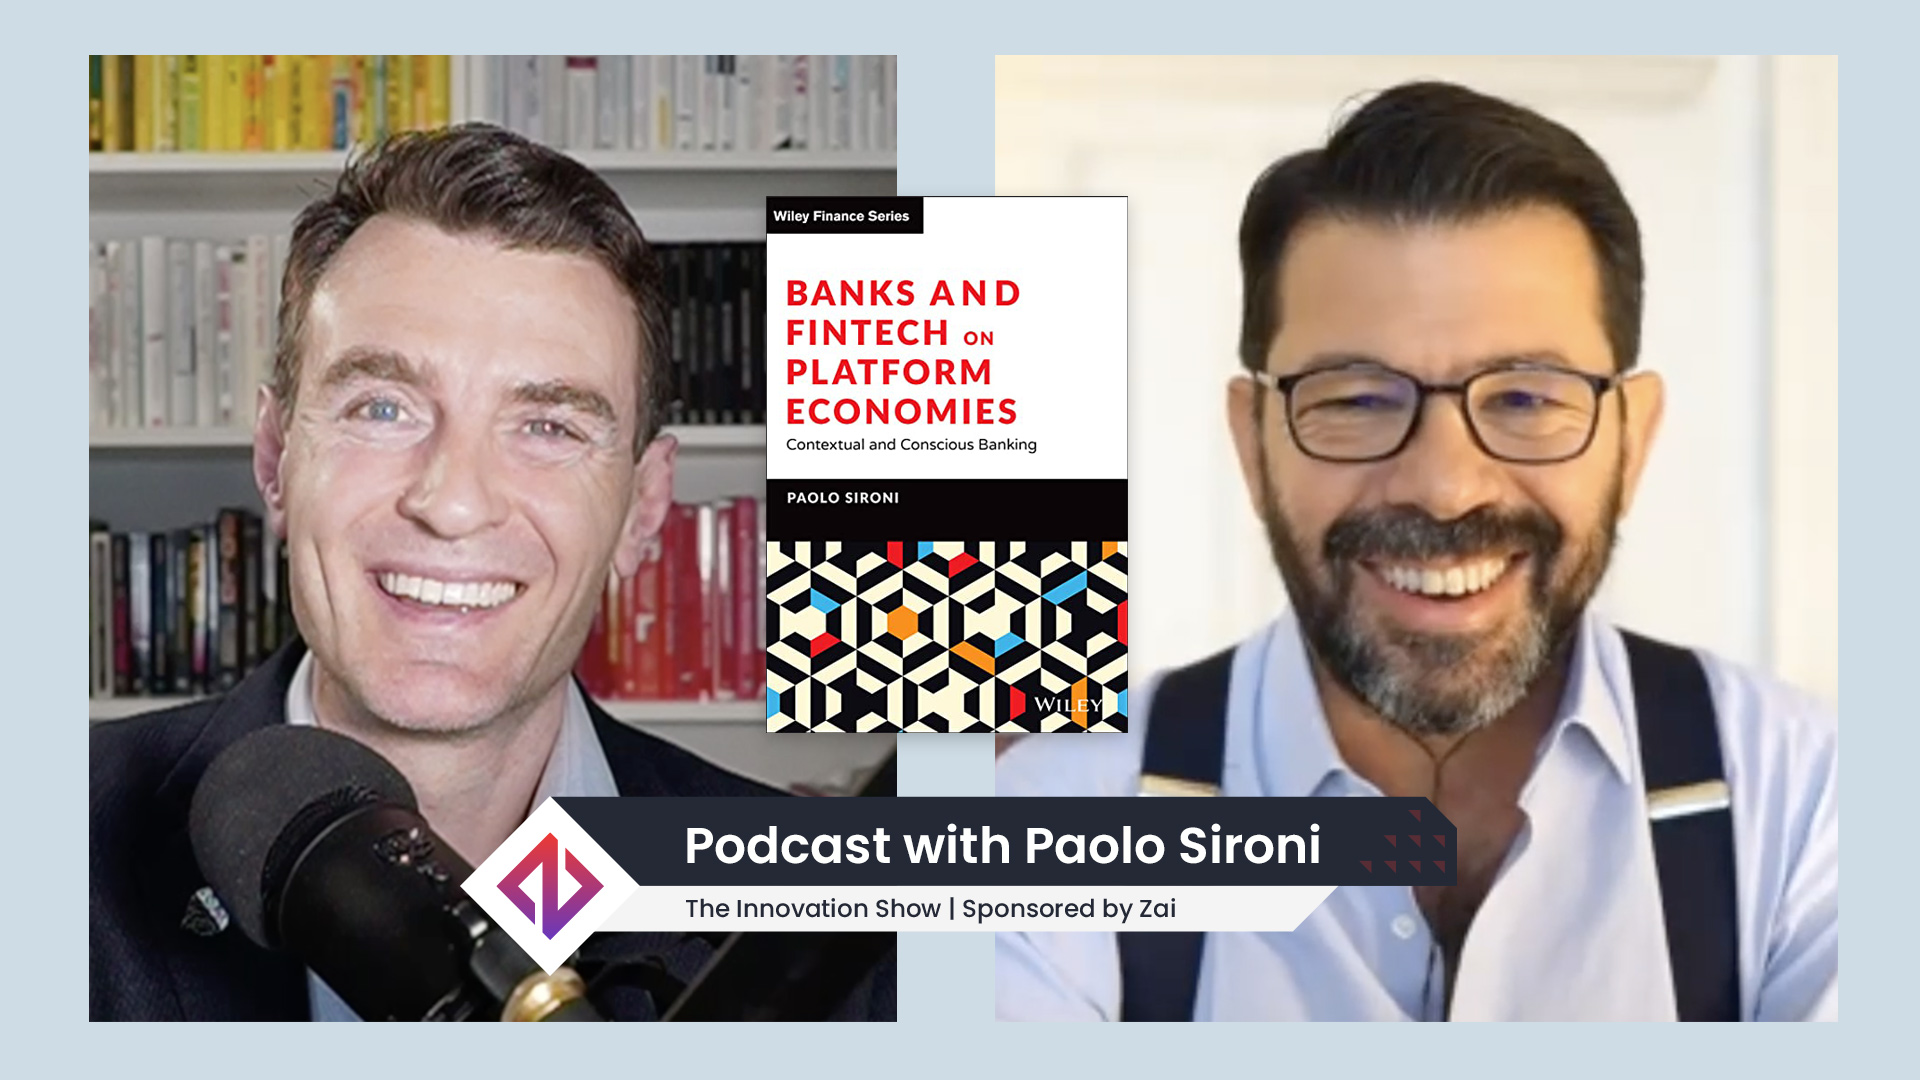 The Paolo Sironi podcast with Aidan McCullen of The Innovation Show